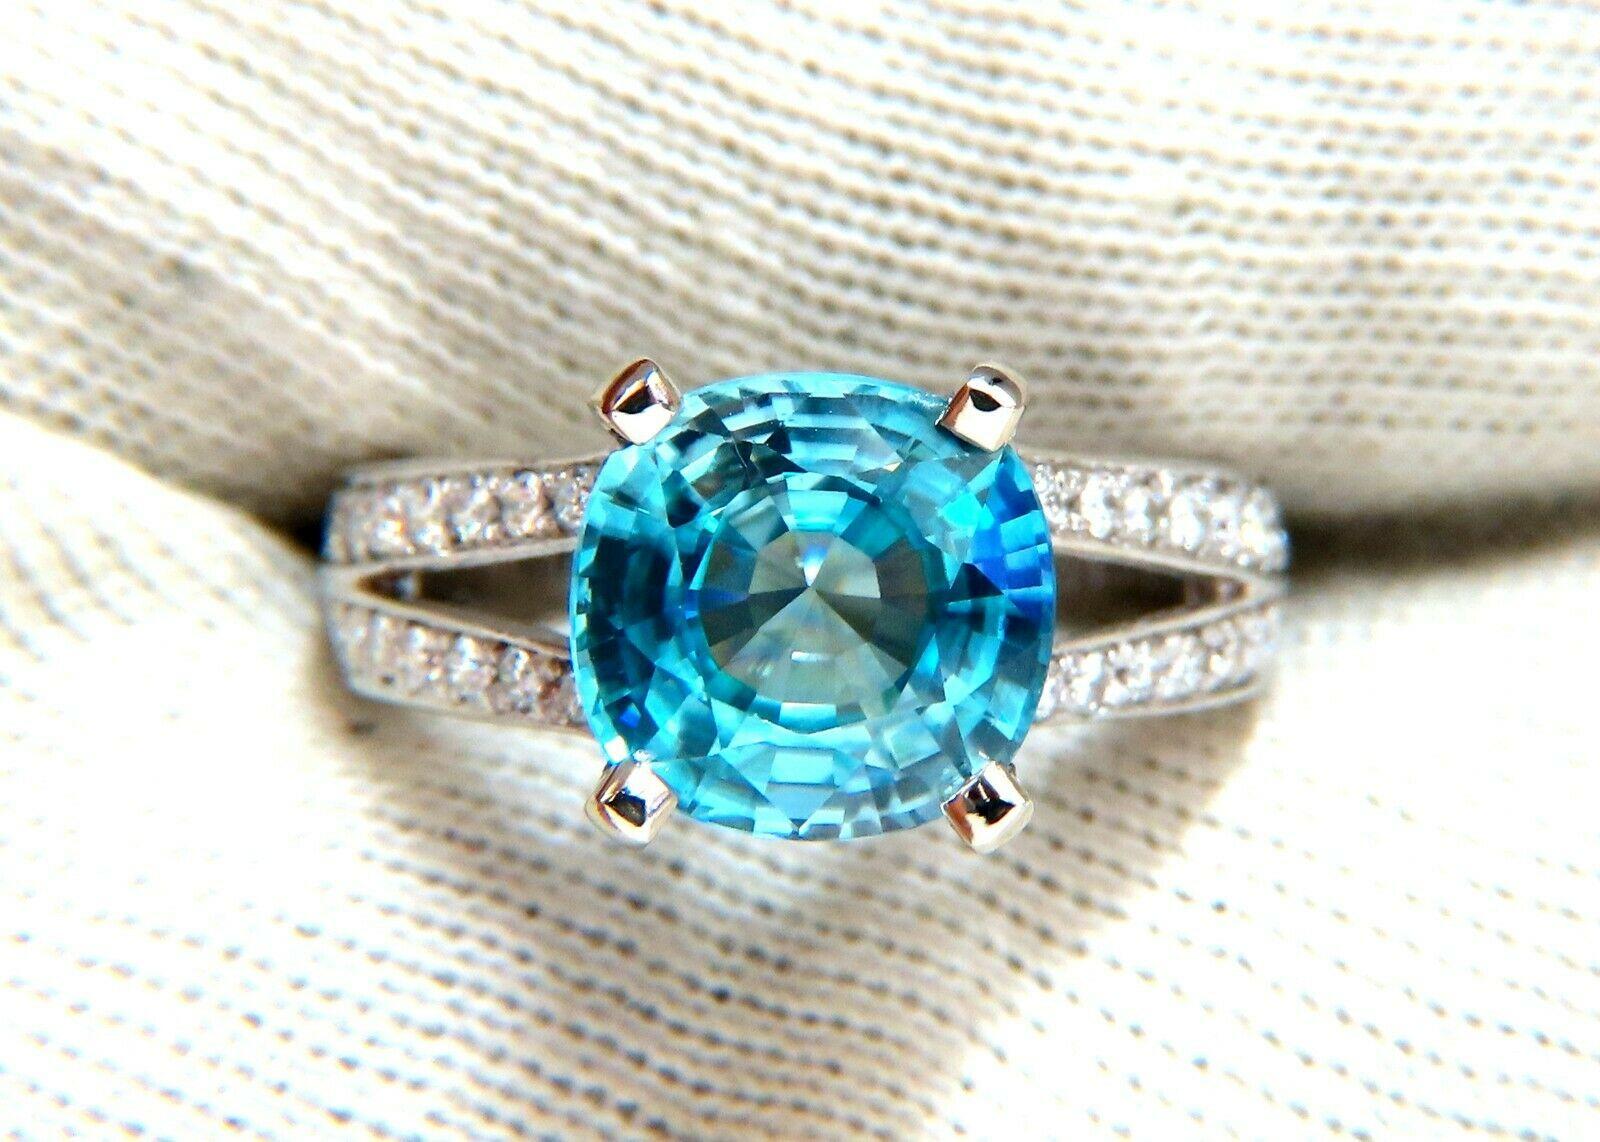 Indigo Blue Natural Zircon Ring

5.02ct. Natural Blue Zircon

Cushion cut

9.5 X 9.8mm

 VS Clean Clarity, Transparent



.80ct Side Full cut natural round diamonds

 G-colors & Vs-2 clarity

  14kt. white gold

6.8 grams

Ring Current size: